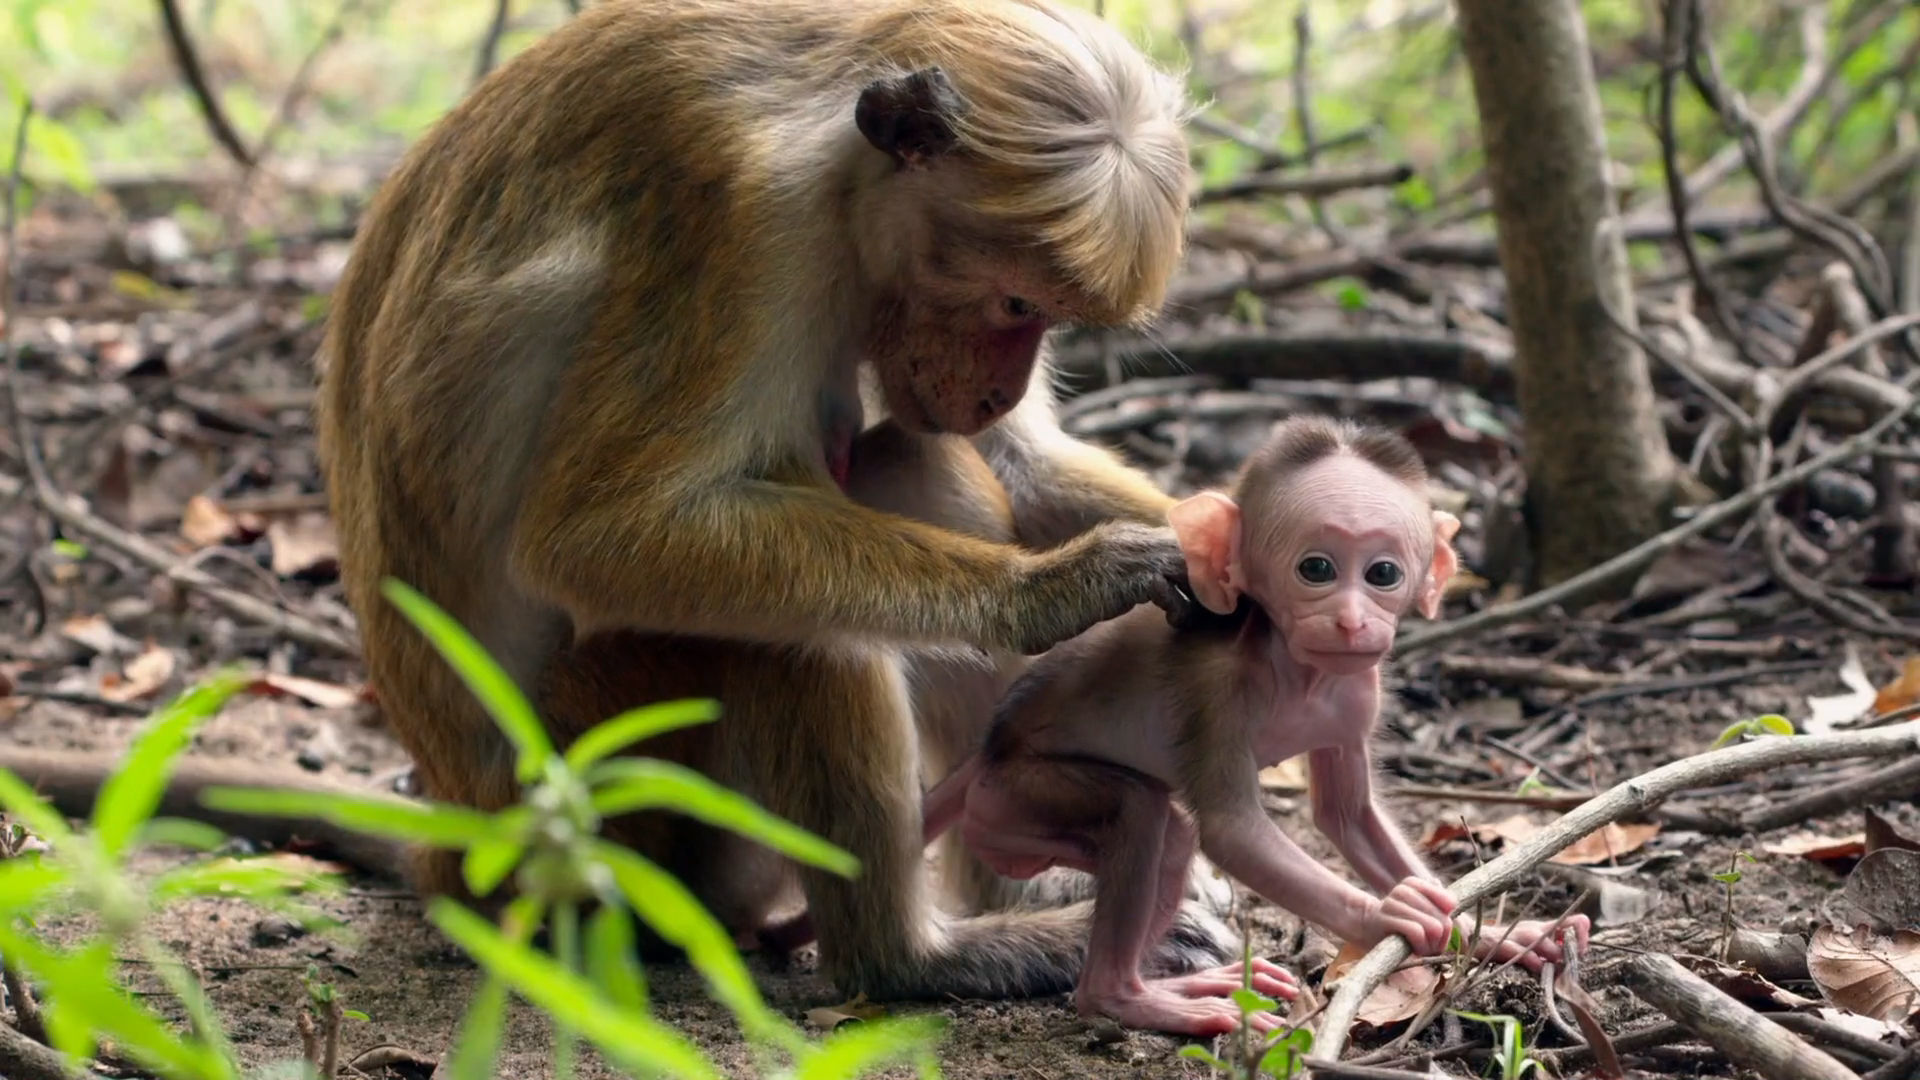 A Special Thank You From Disneynature - Monkey Kingdom